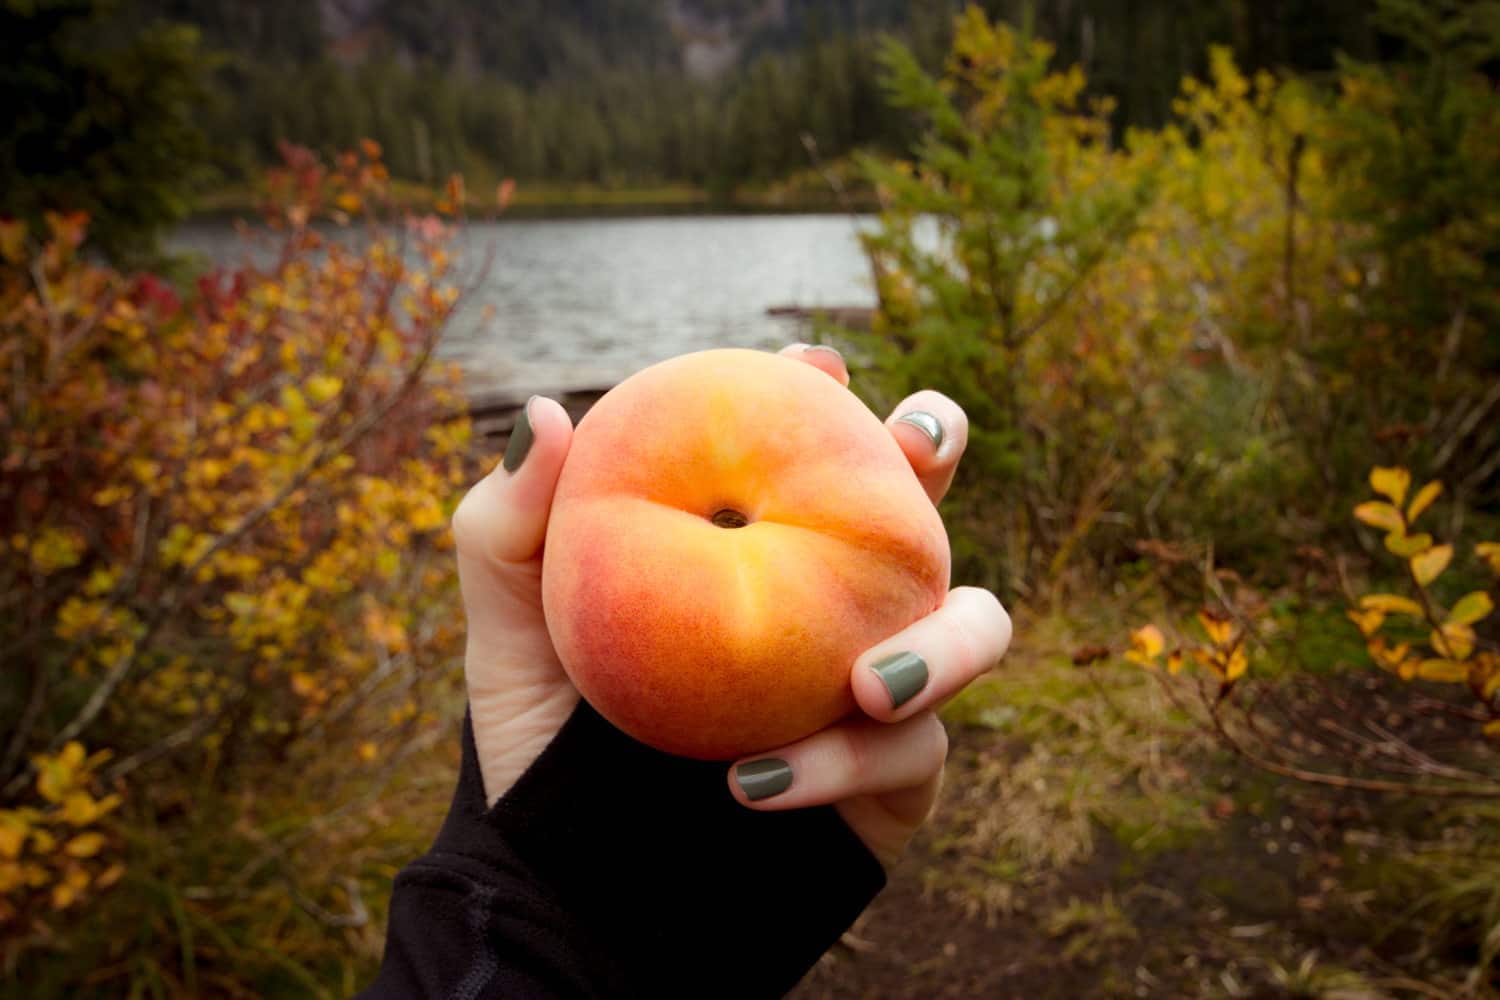 Nothing beats biting into a post-hike peach